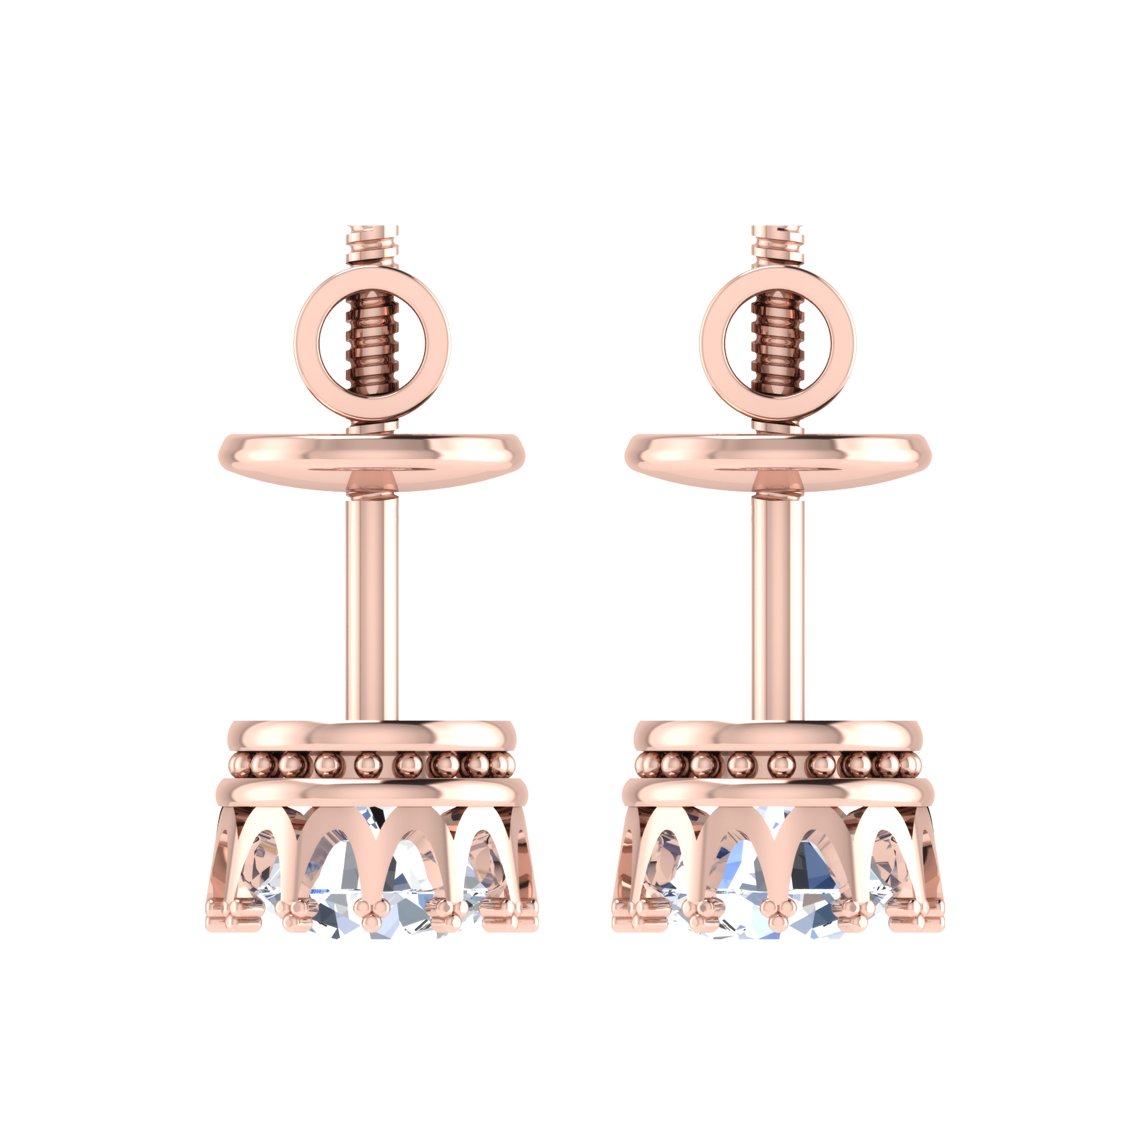 Elegant Solitaire Diamond Earring In Pure Gold By Dhanji Jewels